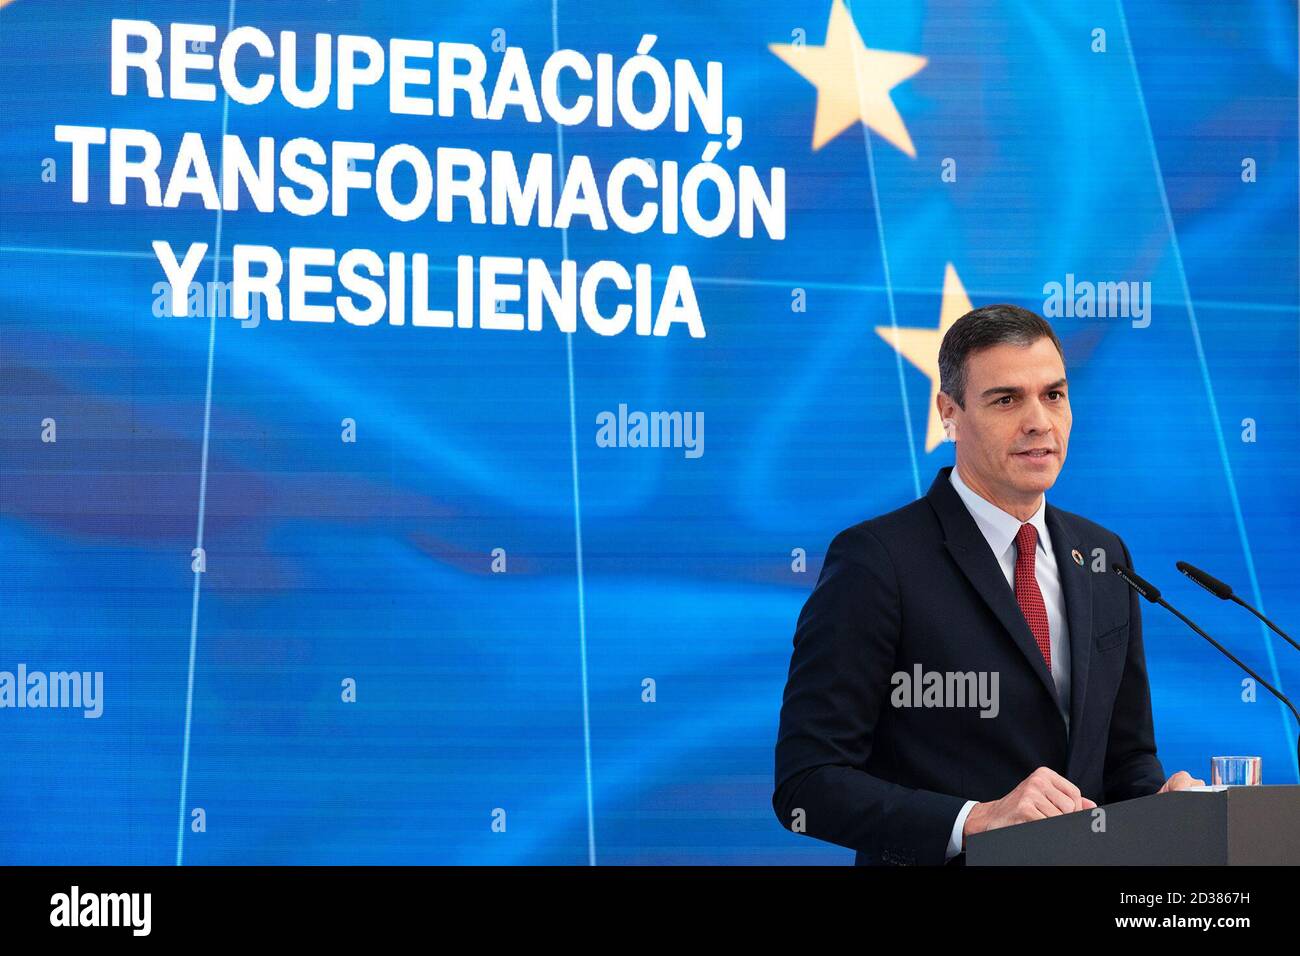 201007) -- MADRID, Oct. 7, 2020 (Xinhua) -- Spanish Prime Minister Pedro  Sanchez delivers a speech in Madrid, Spain, on Oct. 7, 2020. Sanchez on  Wednesday unveiled a stimulus plan which will